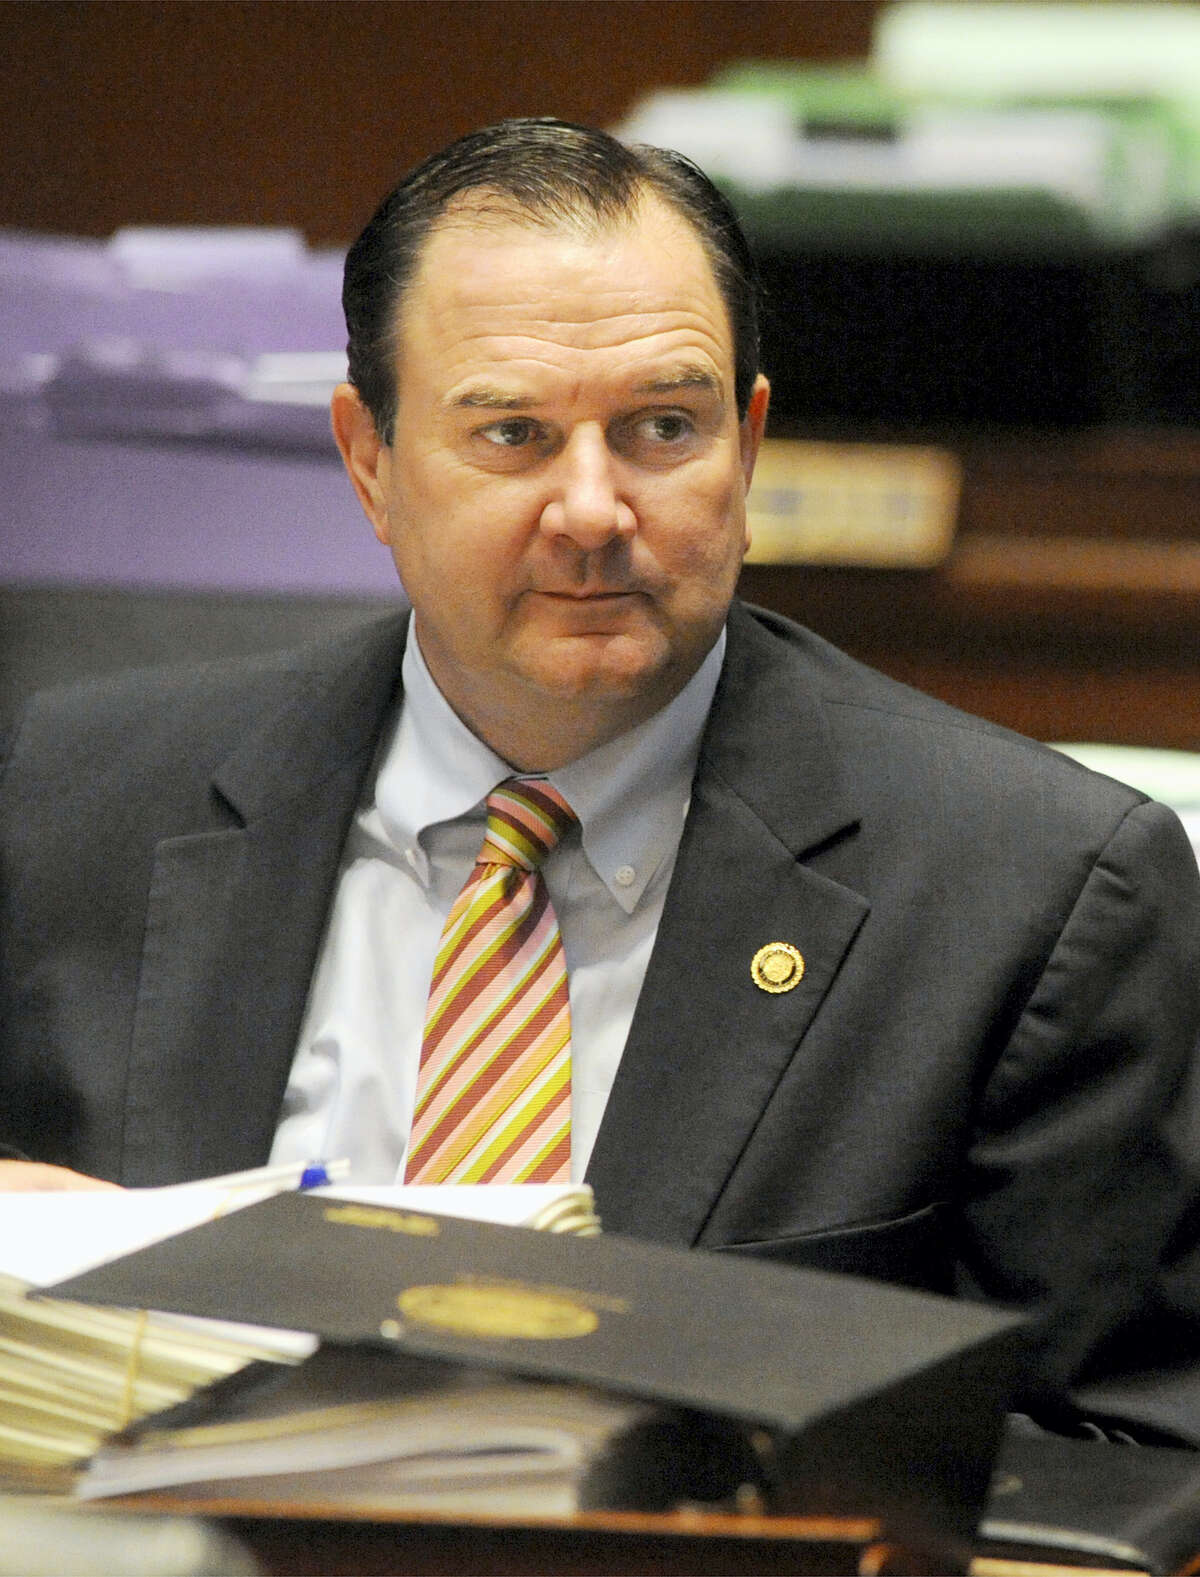 FILE - In this May 2, 2011, file photo, Sen. Mike Kehoe, R-Jefferson City, listens to colleagues debate at the Missouri Capitol in Jefferson City. Kehoe backed a Missouri law, which took effect in 2016, cutting the maximum length of time that people can receive unemployment benefits to as few as 13 weeks.